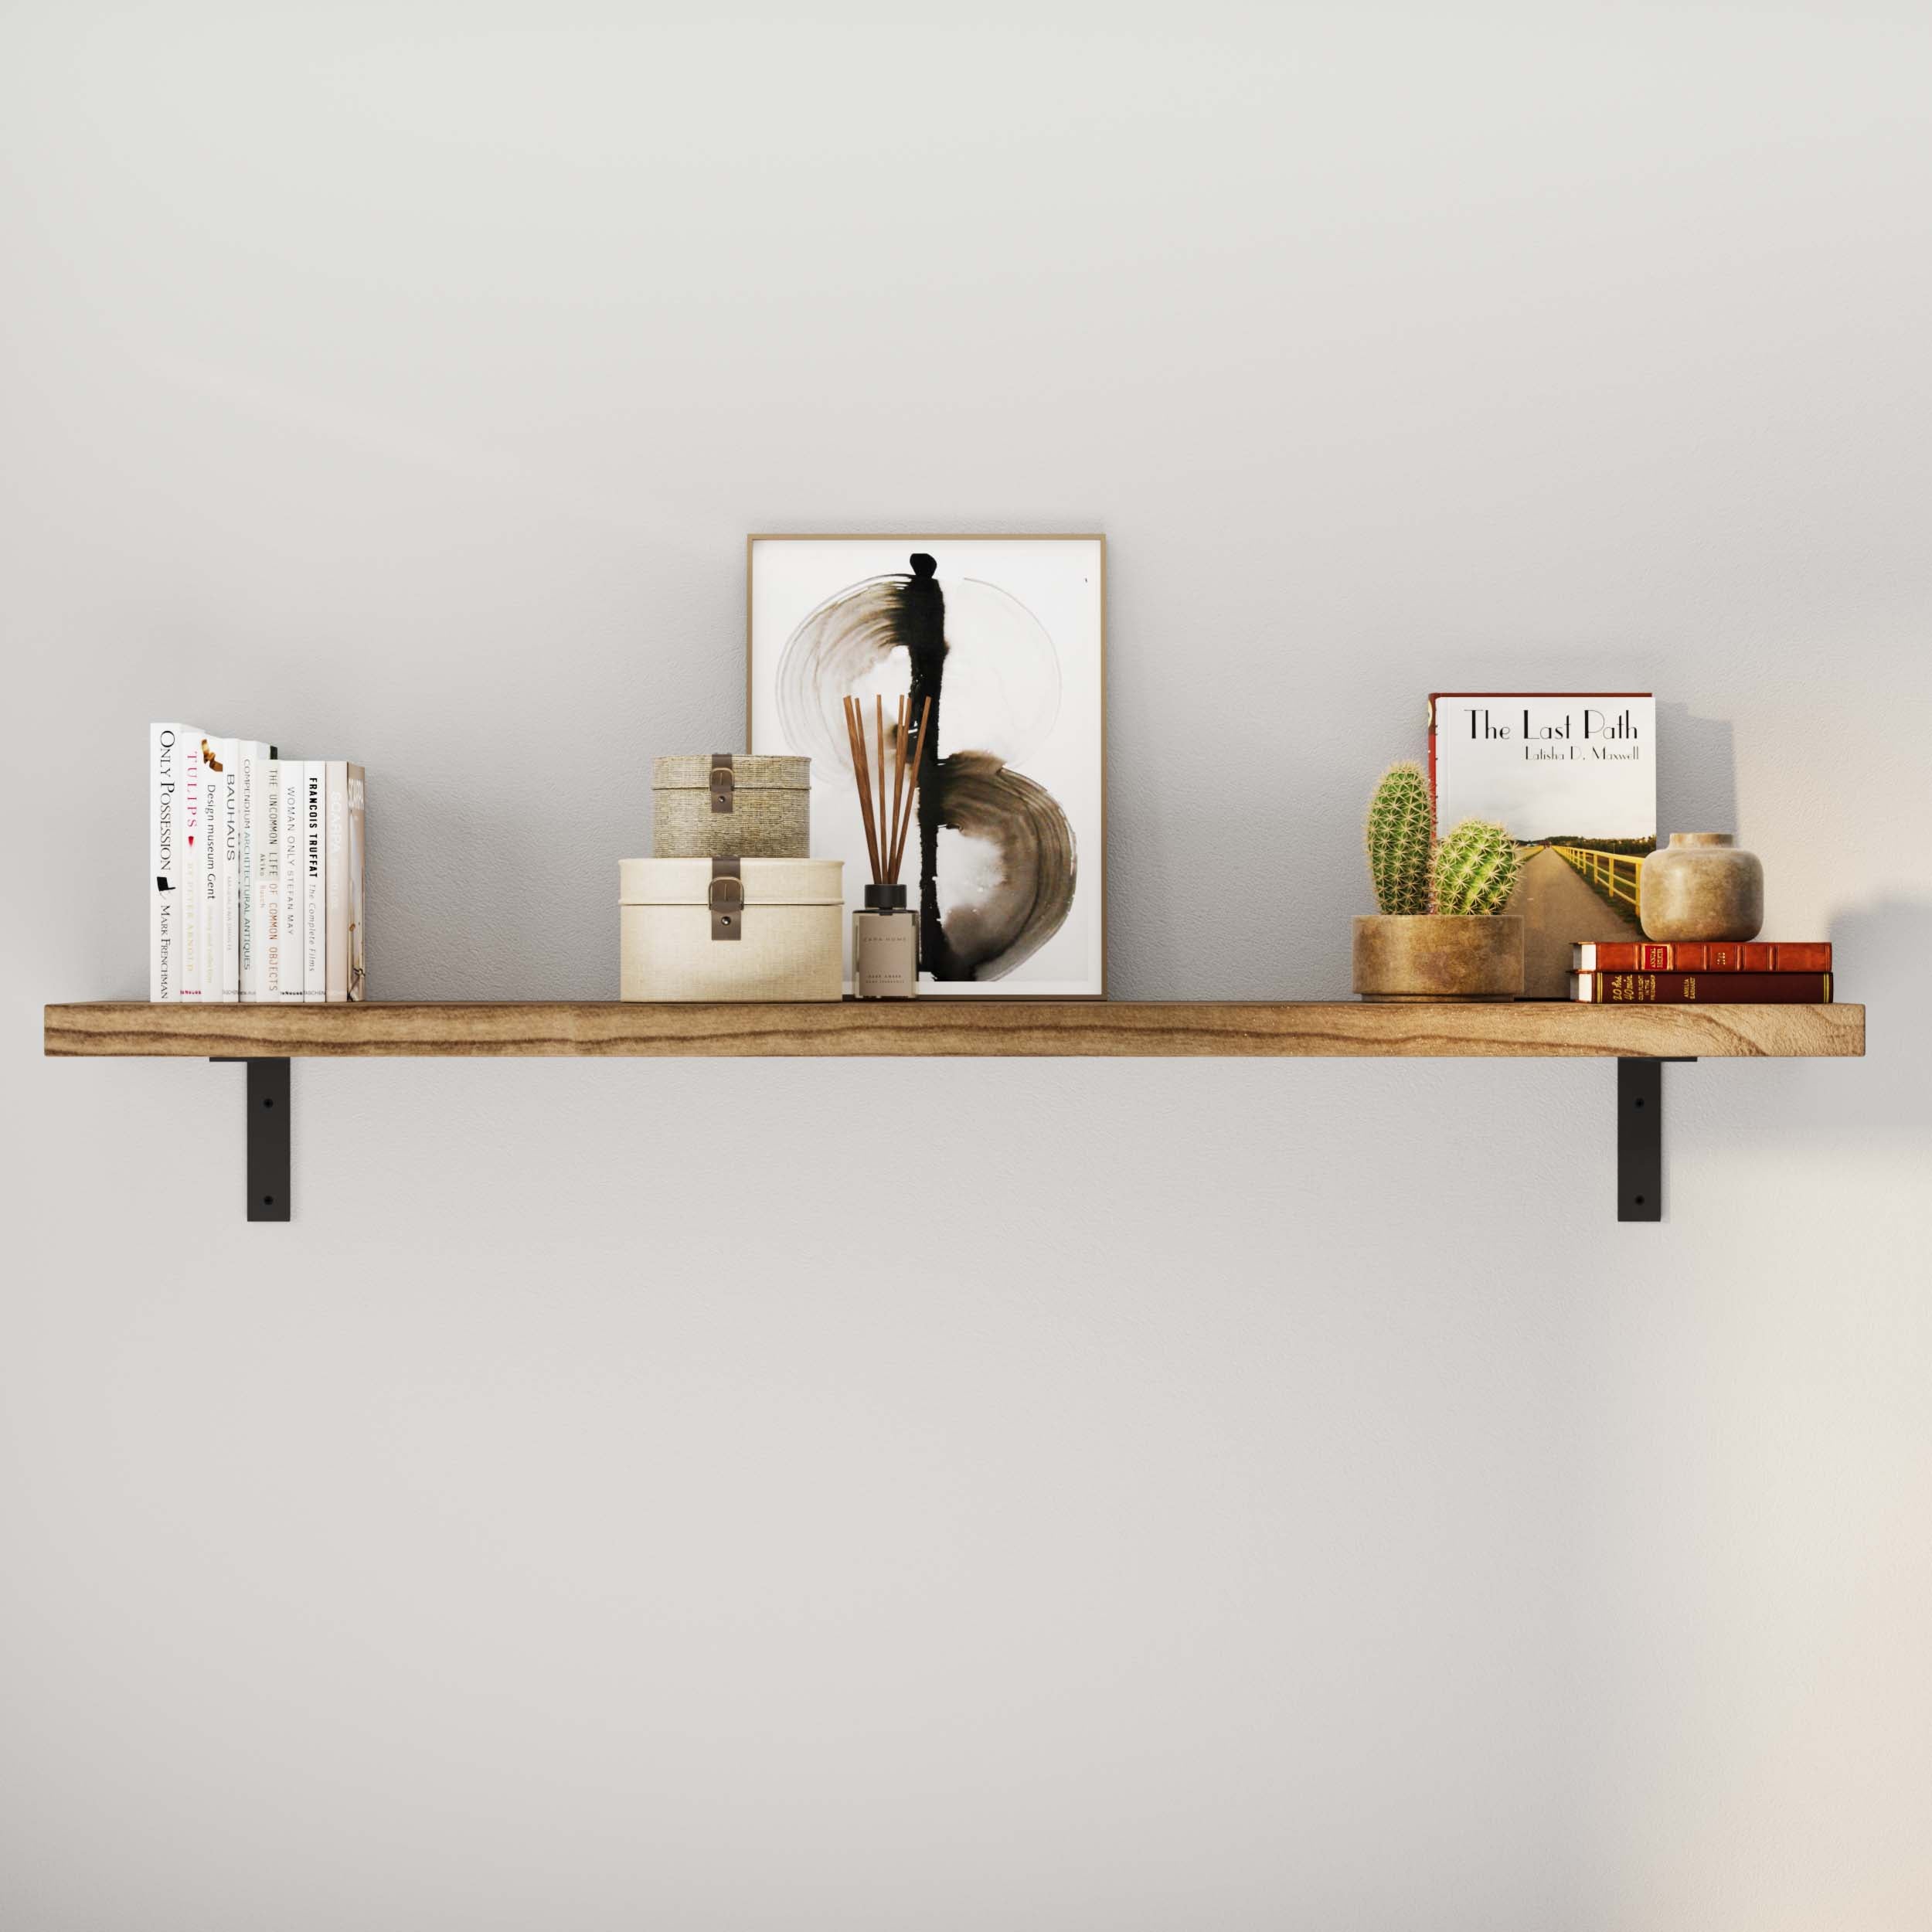 A rustic shelf affixed to a light-colored wall by two sturdy metal brackets with books, decorative boxes, a framed artwork, a cactus, and candles.